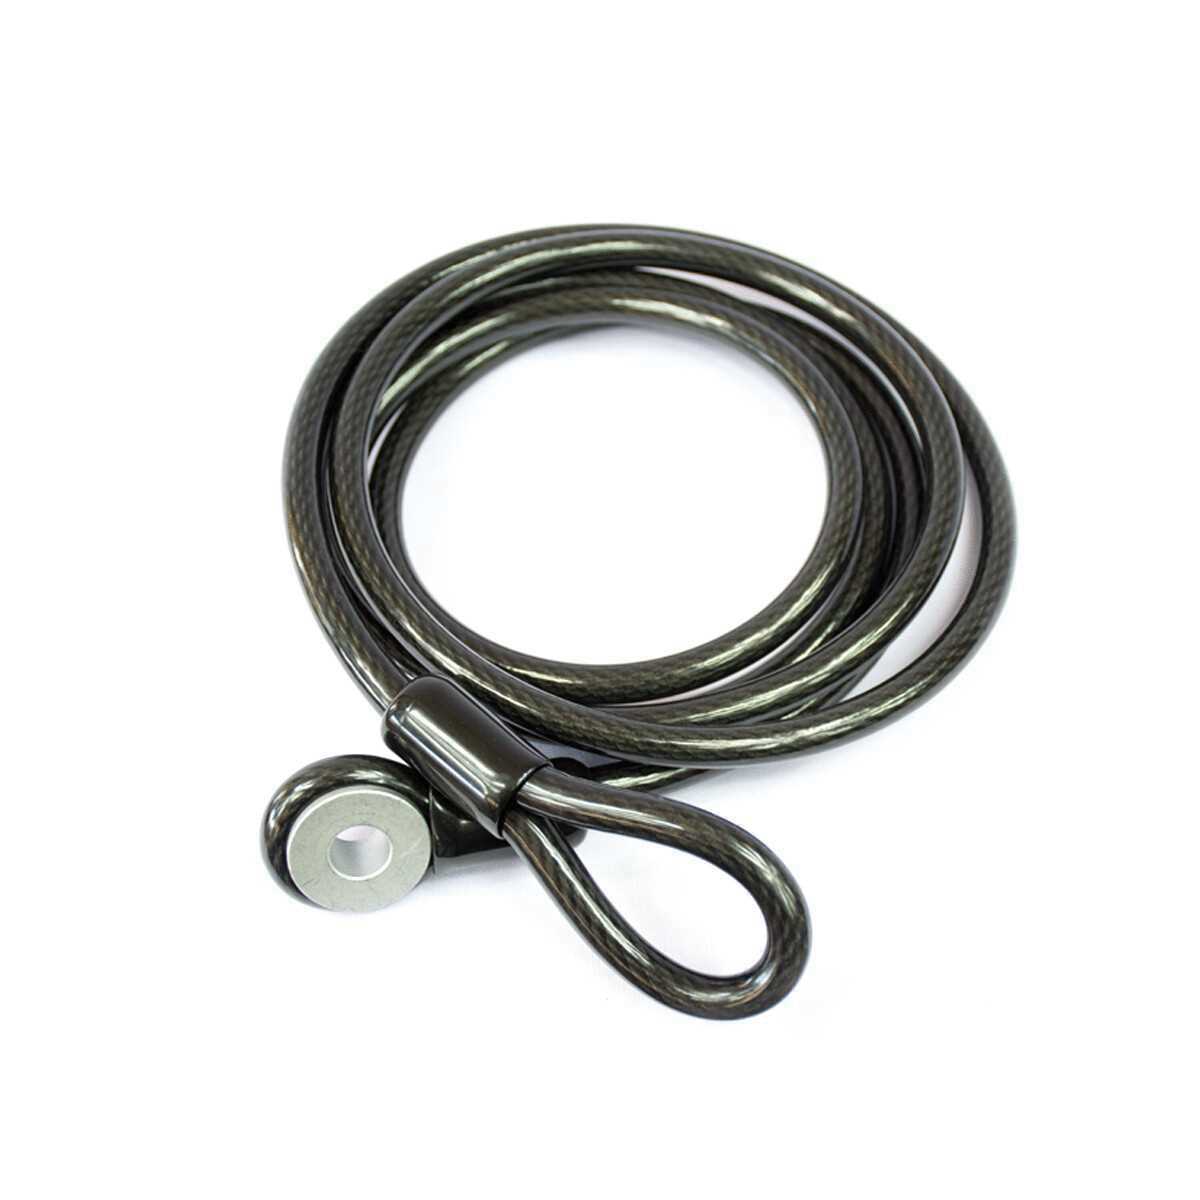 Replacement Security Cable for use with Locking Hitch Pin